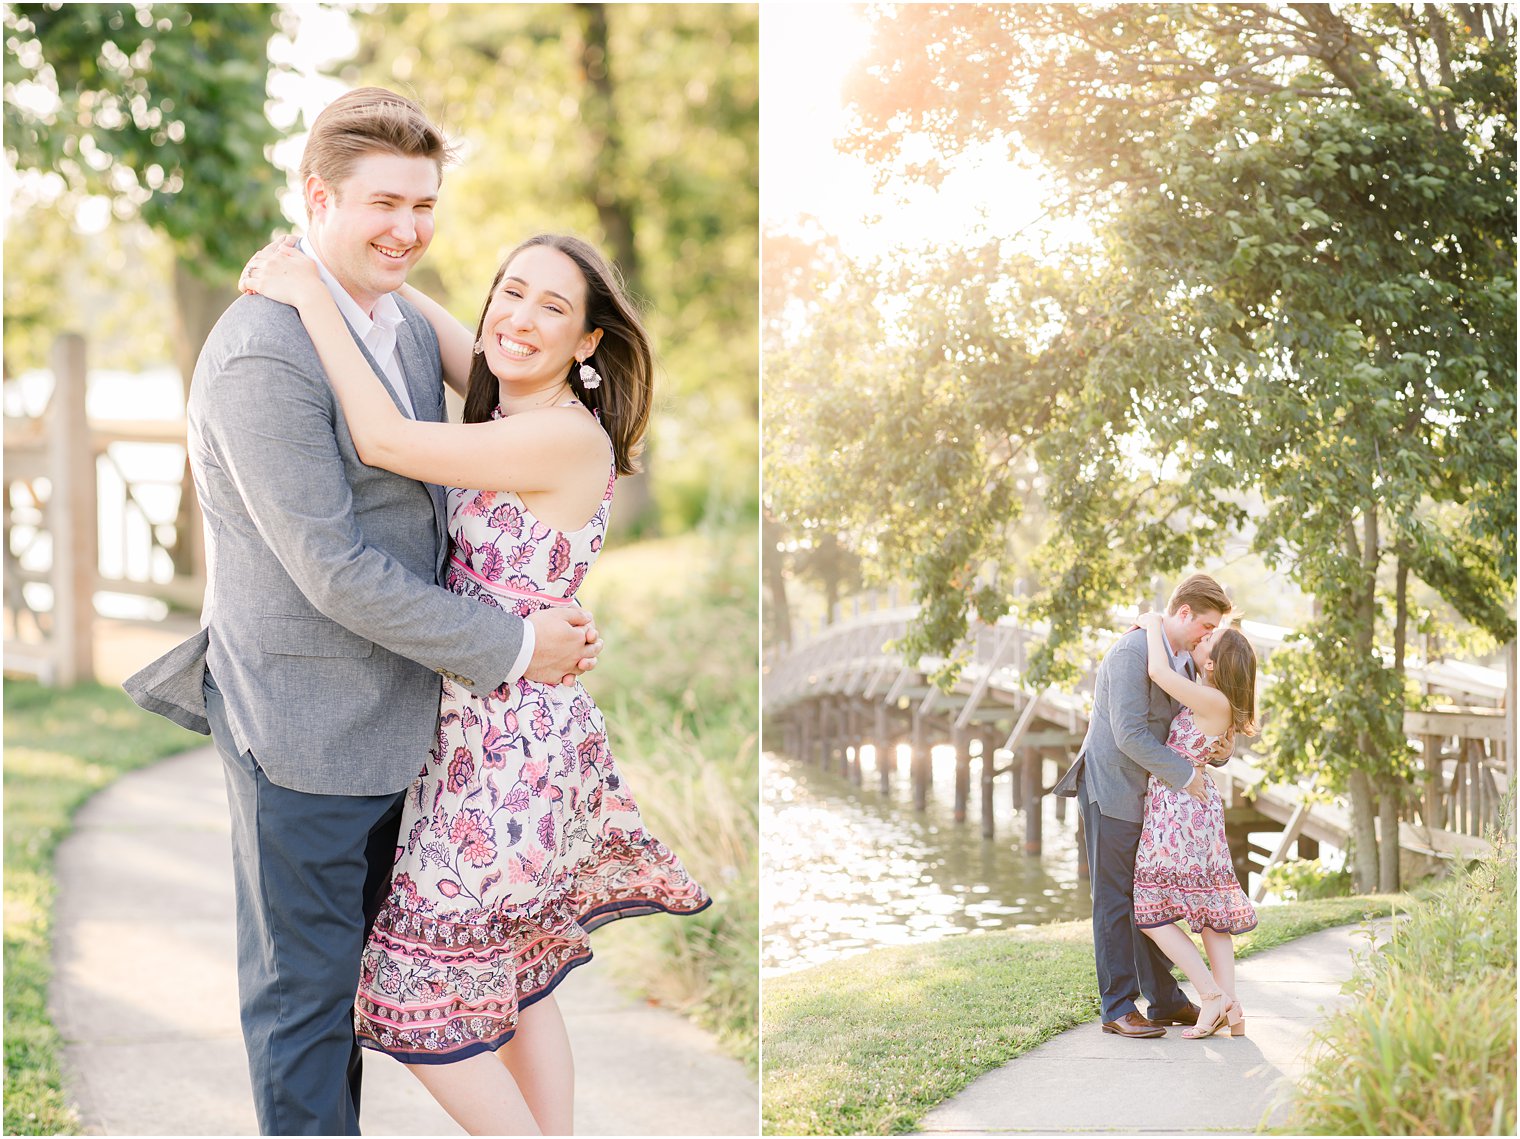 Preppy outfits for engagement photos in Spring Lake, NJ 